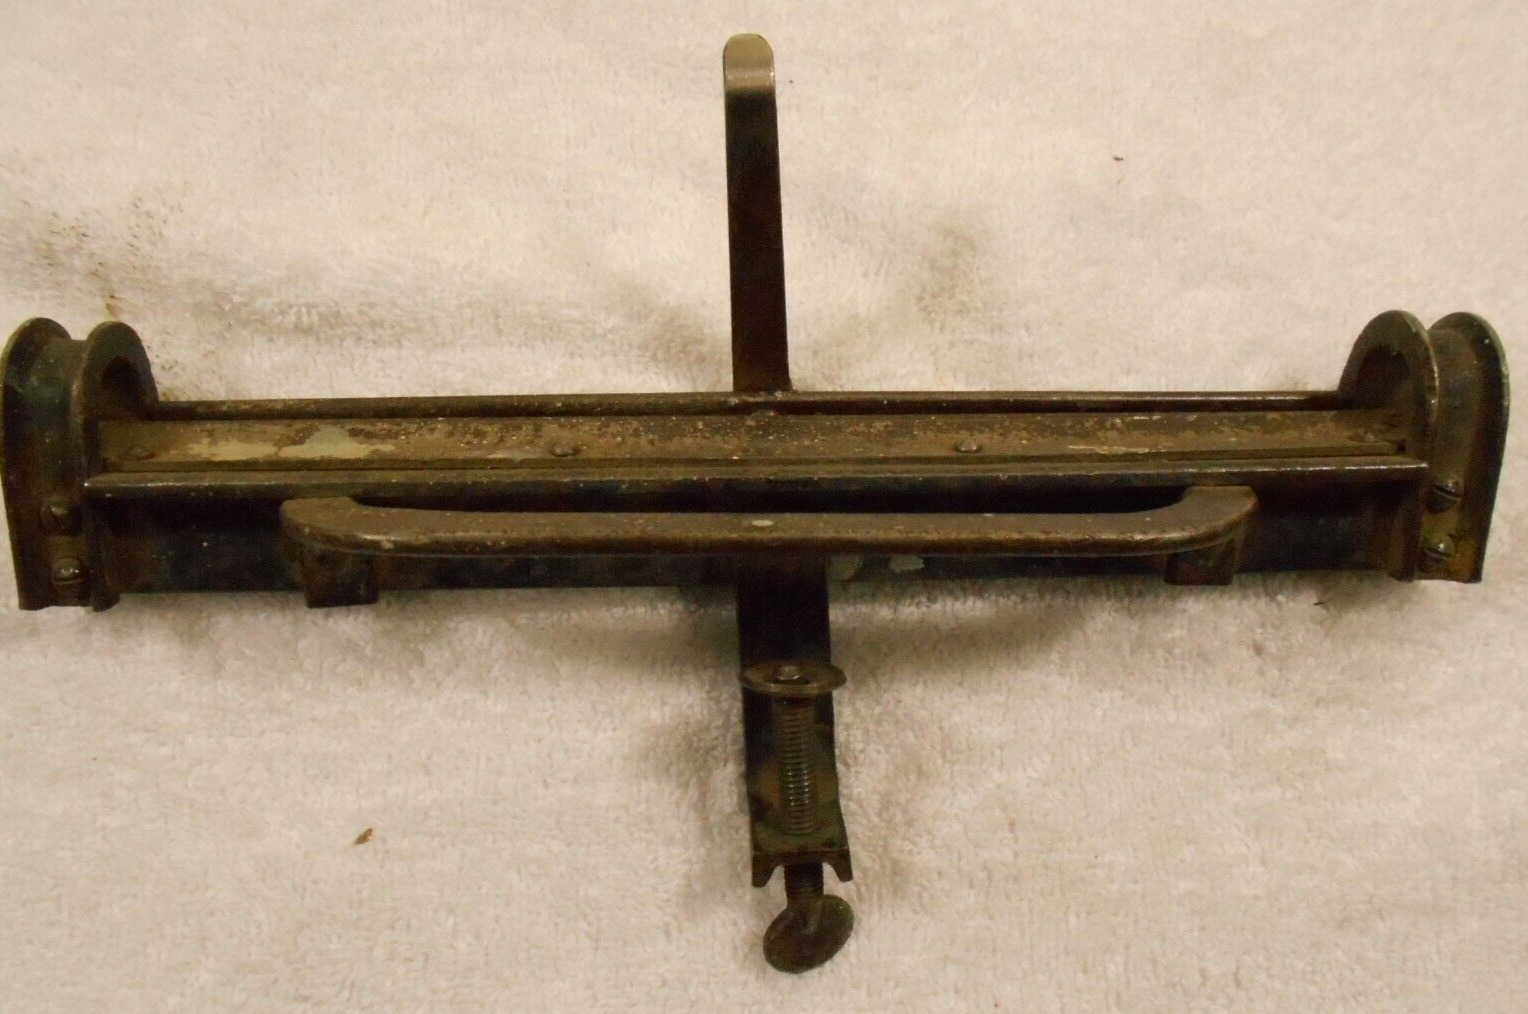 Antique Vintage RICH-CON Saw Blade Sharpening Vise Clamp